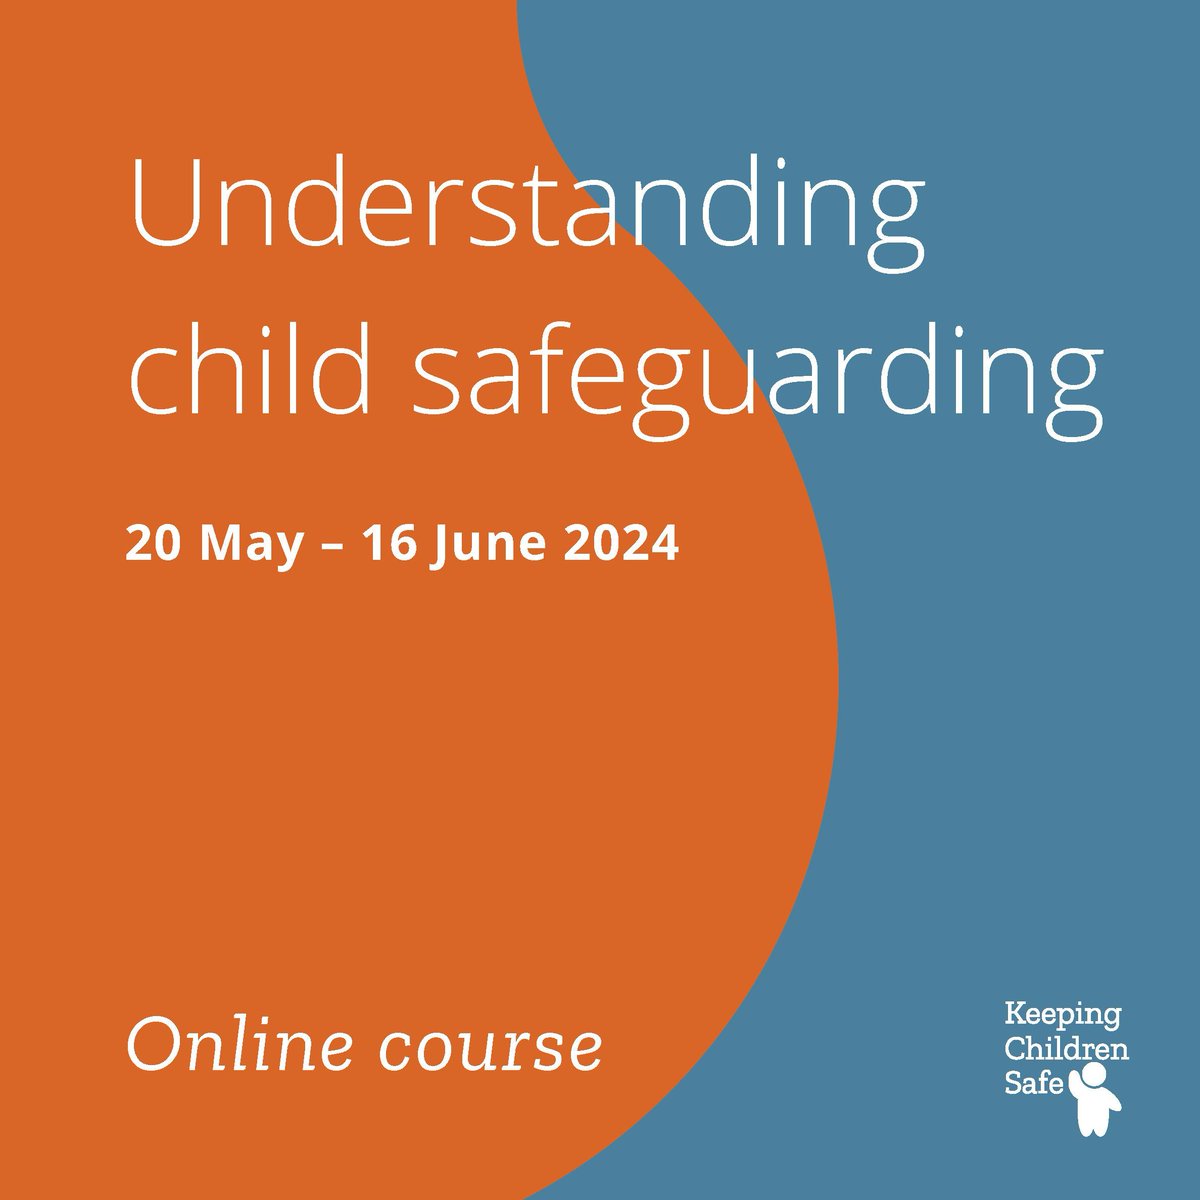 If you work with, or for children, this course has been designed to help you keep them safe from abuse. The Understanding Child Safeguarding course is for individuals like you, as well as groups and covers a range of child safeguarding topics. Book today! buff.ly/3TzGa15